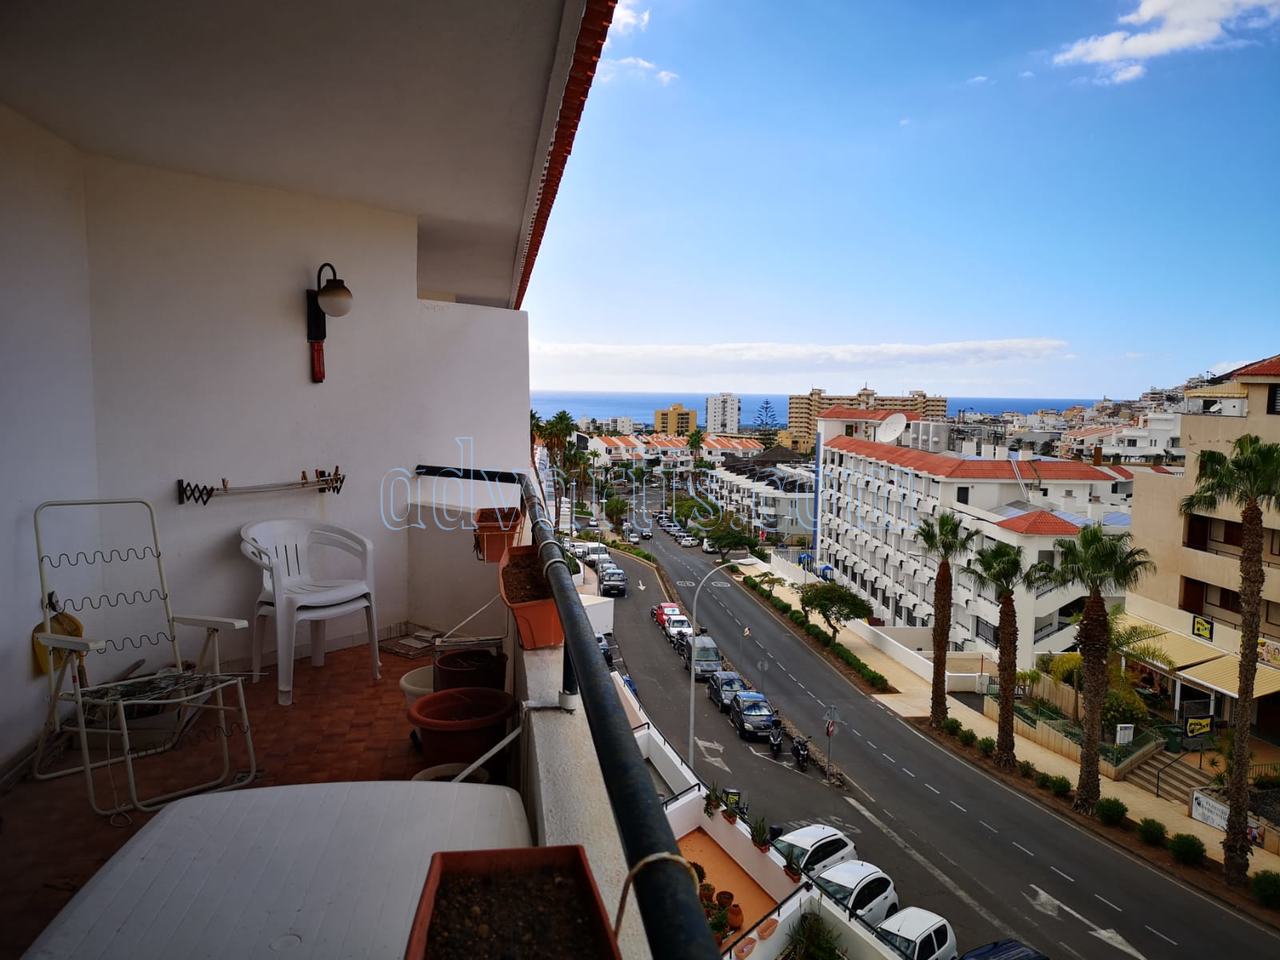 2 bedroom apartment for sale in Los Cristianos, Tenerife €165.000